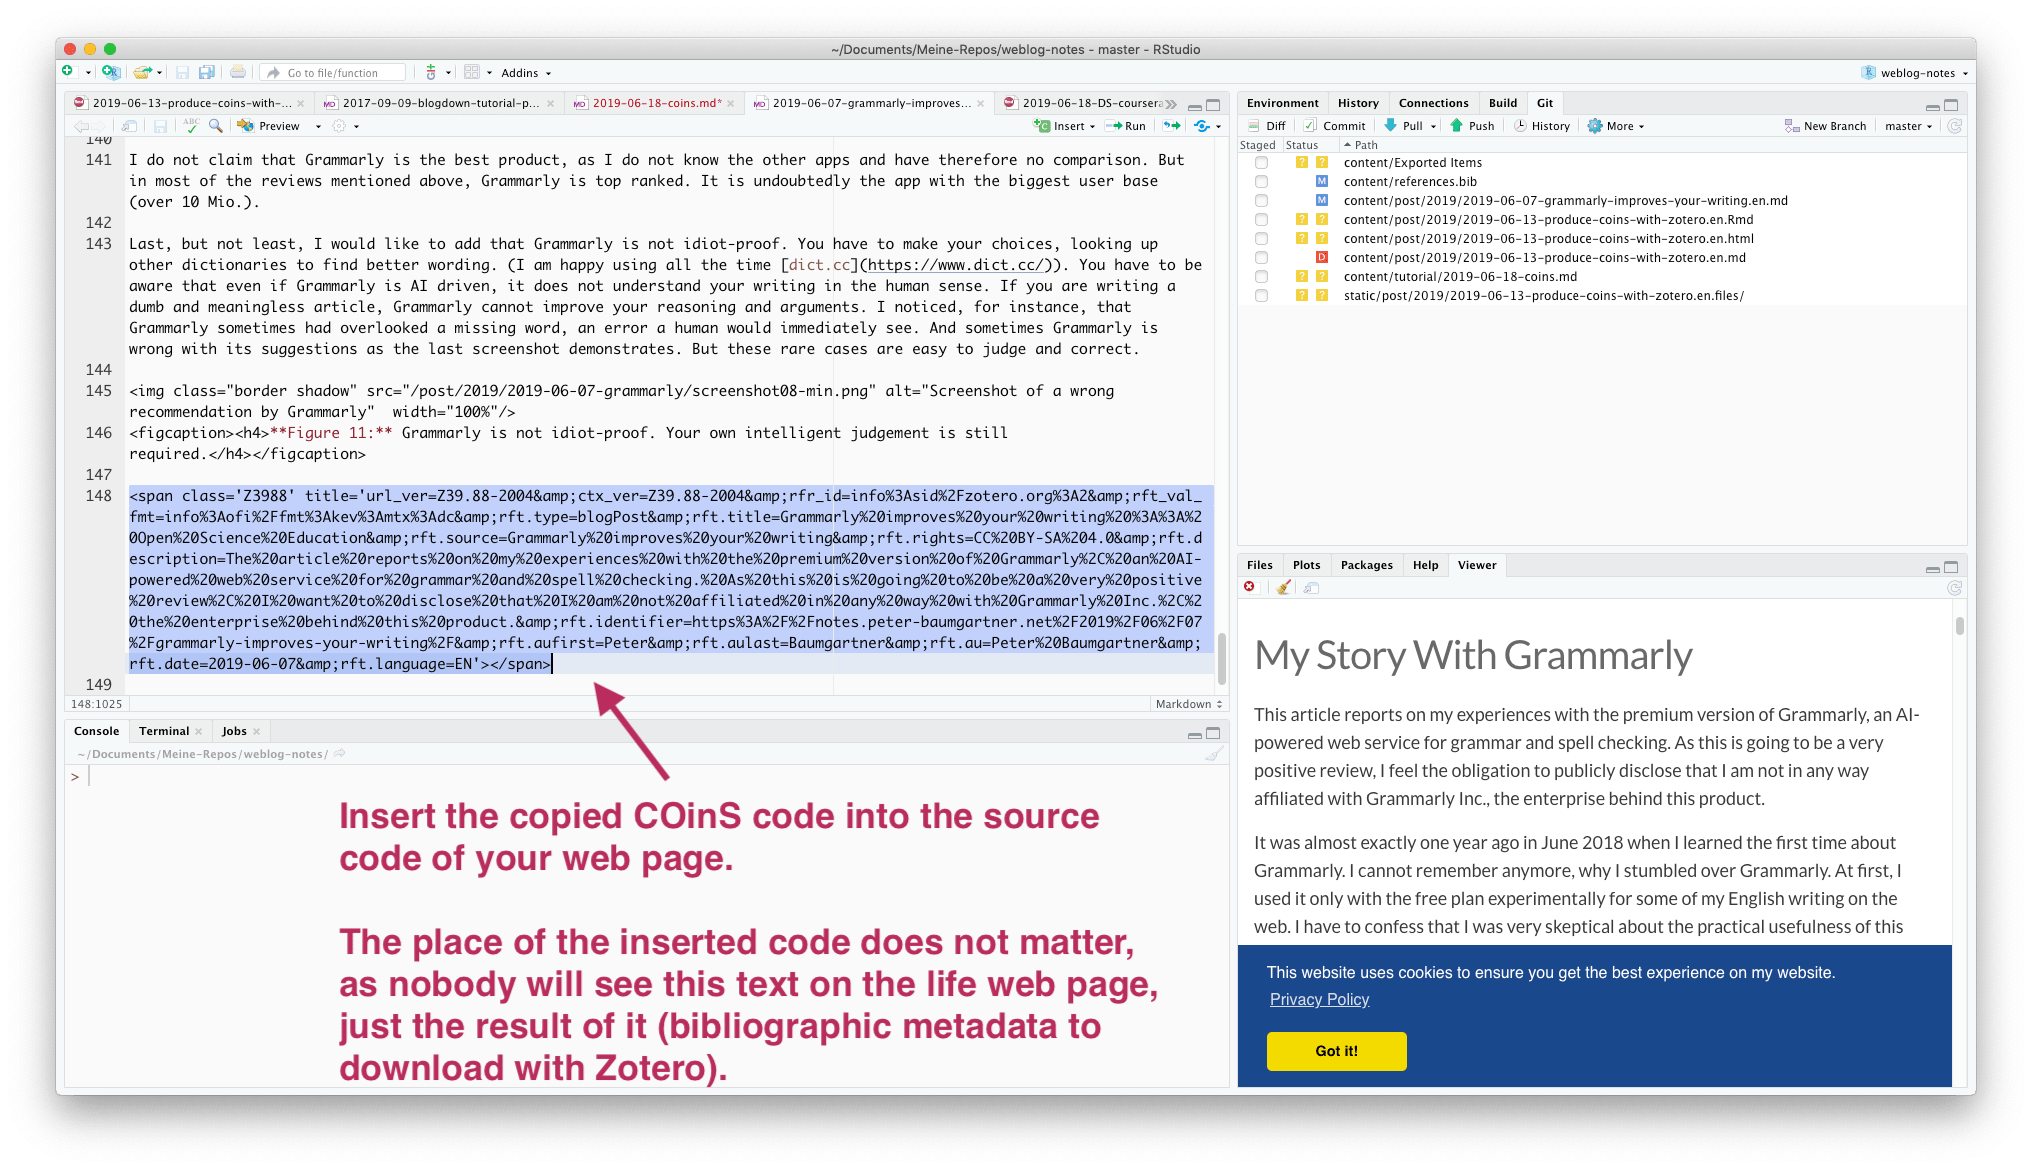 Screenshot shows how the exported COinS code is inserted into the HTML source code of the web page.